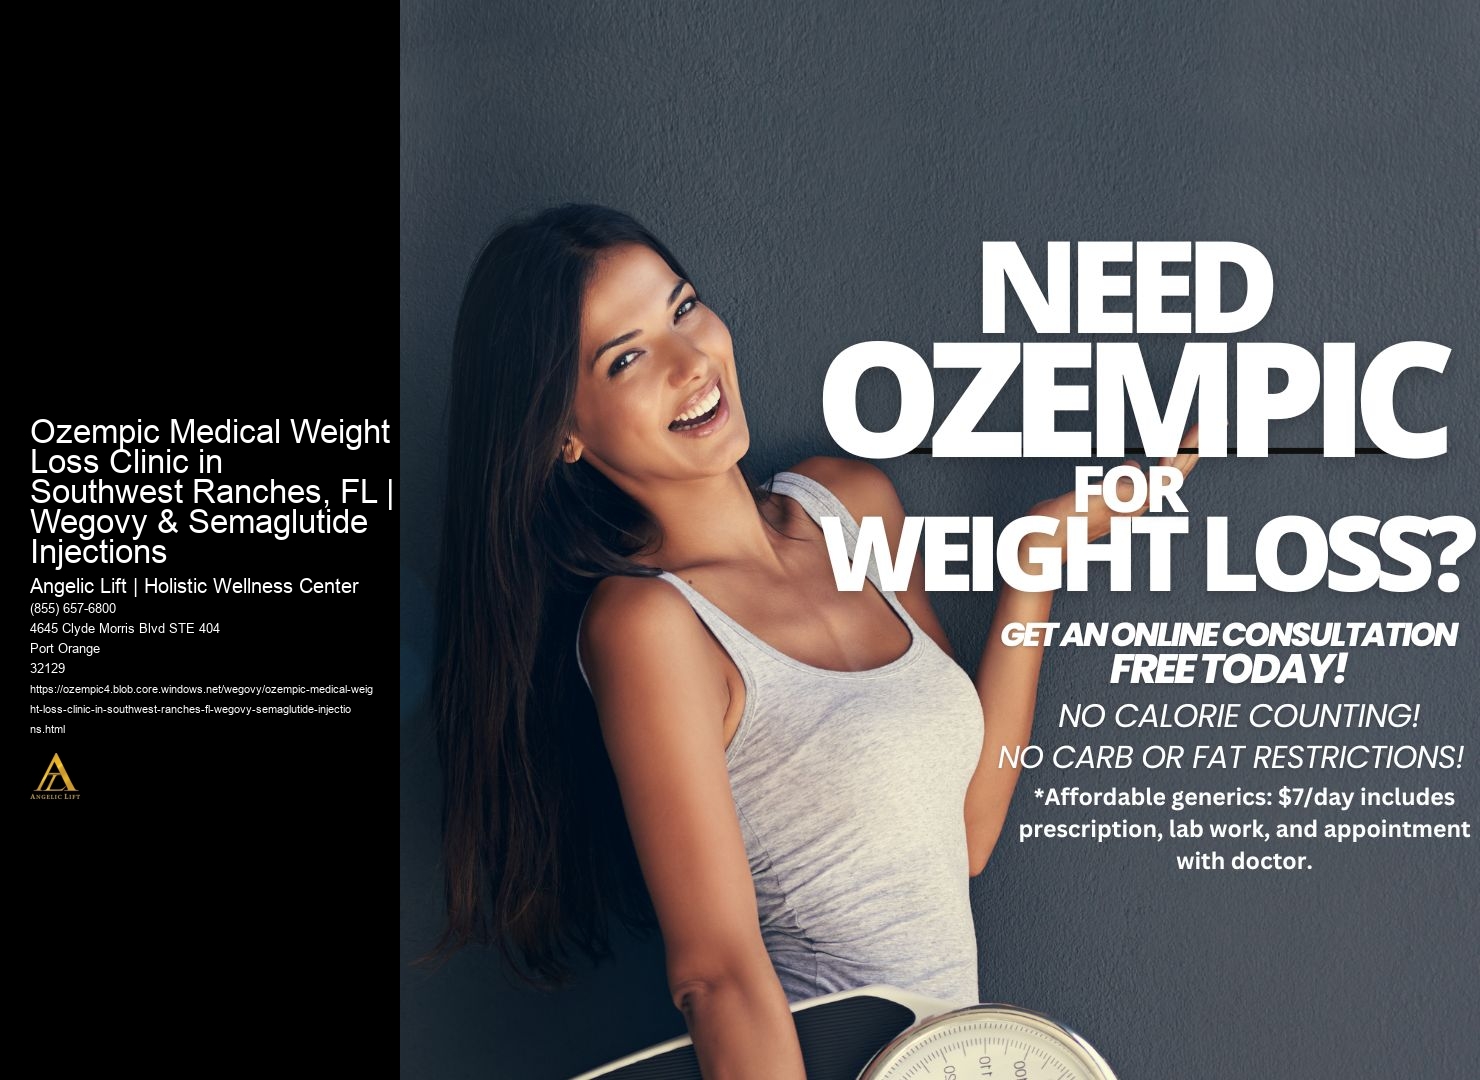 Ozempic Medical Weight Loss Clinic in Southwest Ranches, FL | Wegovy & Semaglutide Injections